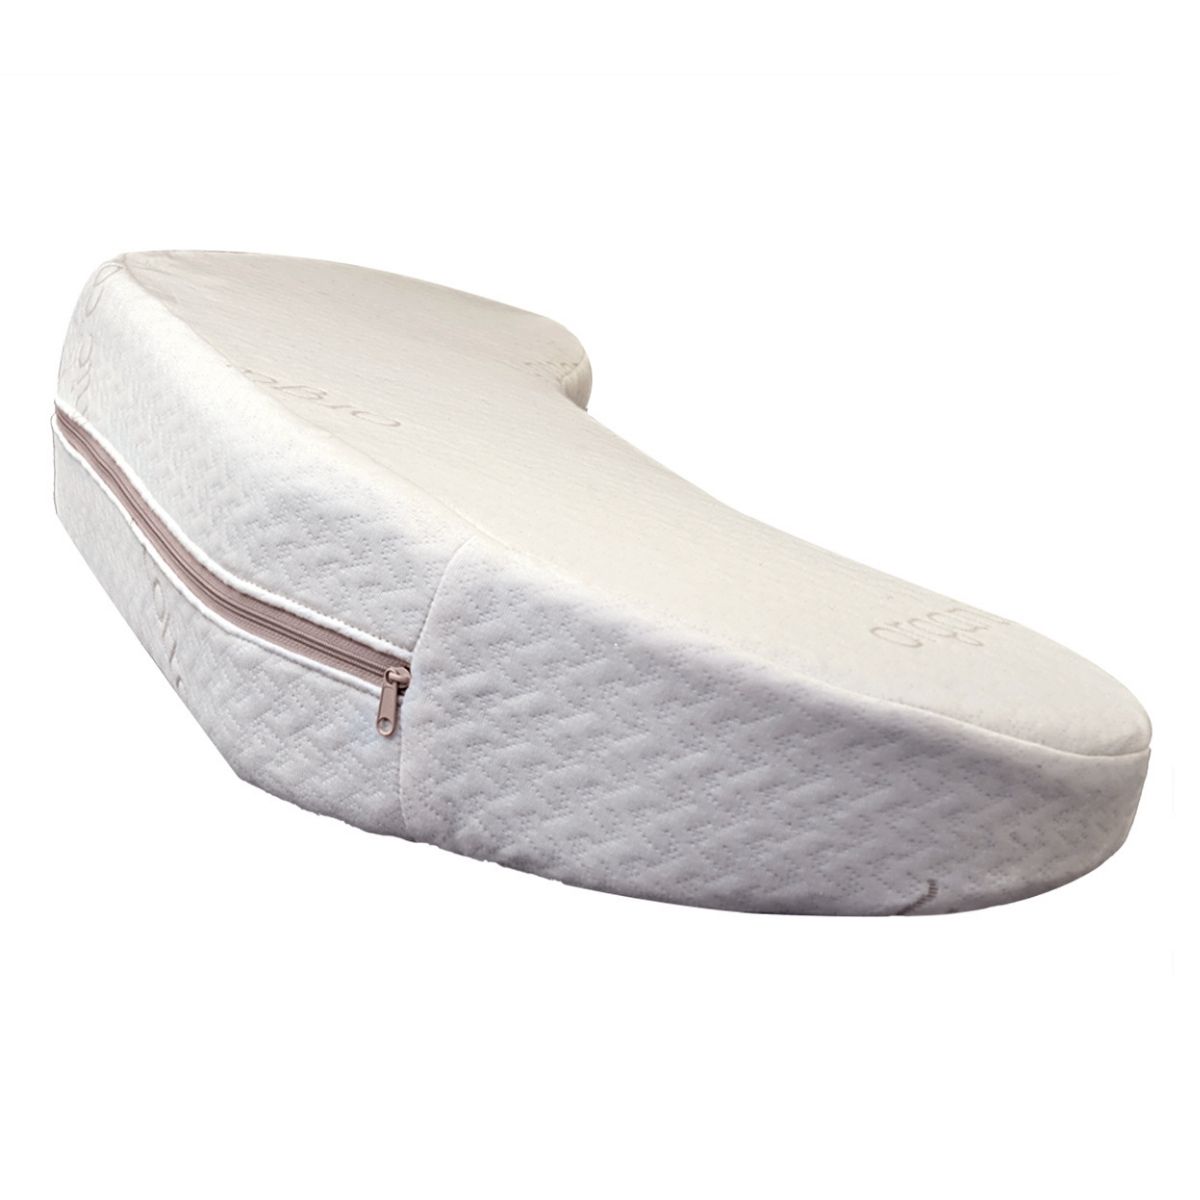 Bedsore Rescue Positioning Wedge Cushion for Home - All Derma Fabric Casing  - Jewell Nursing Solutions